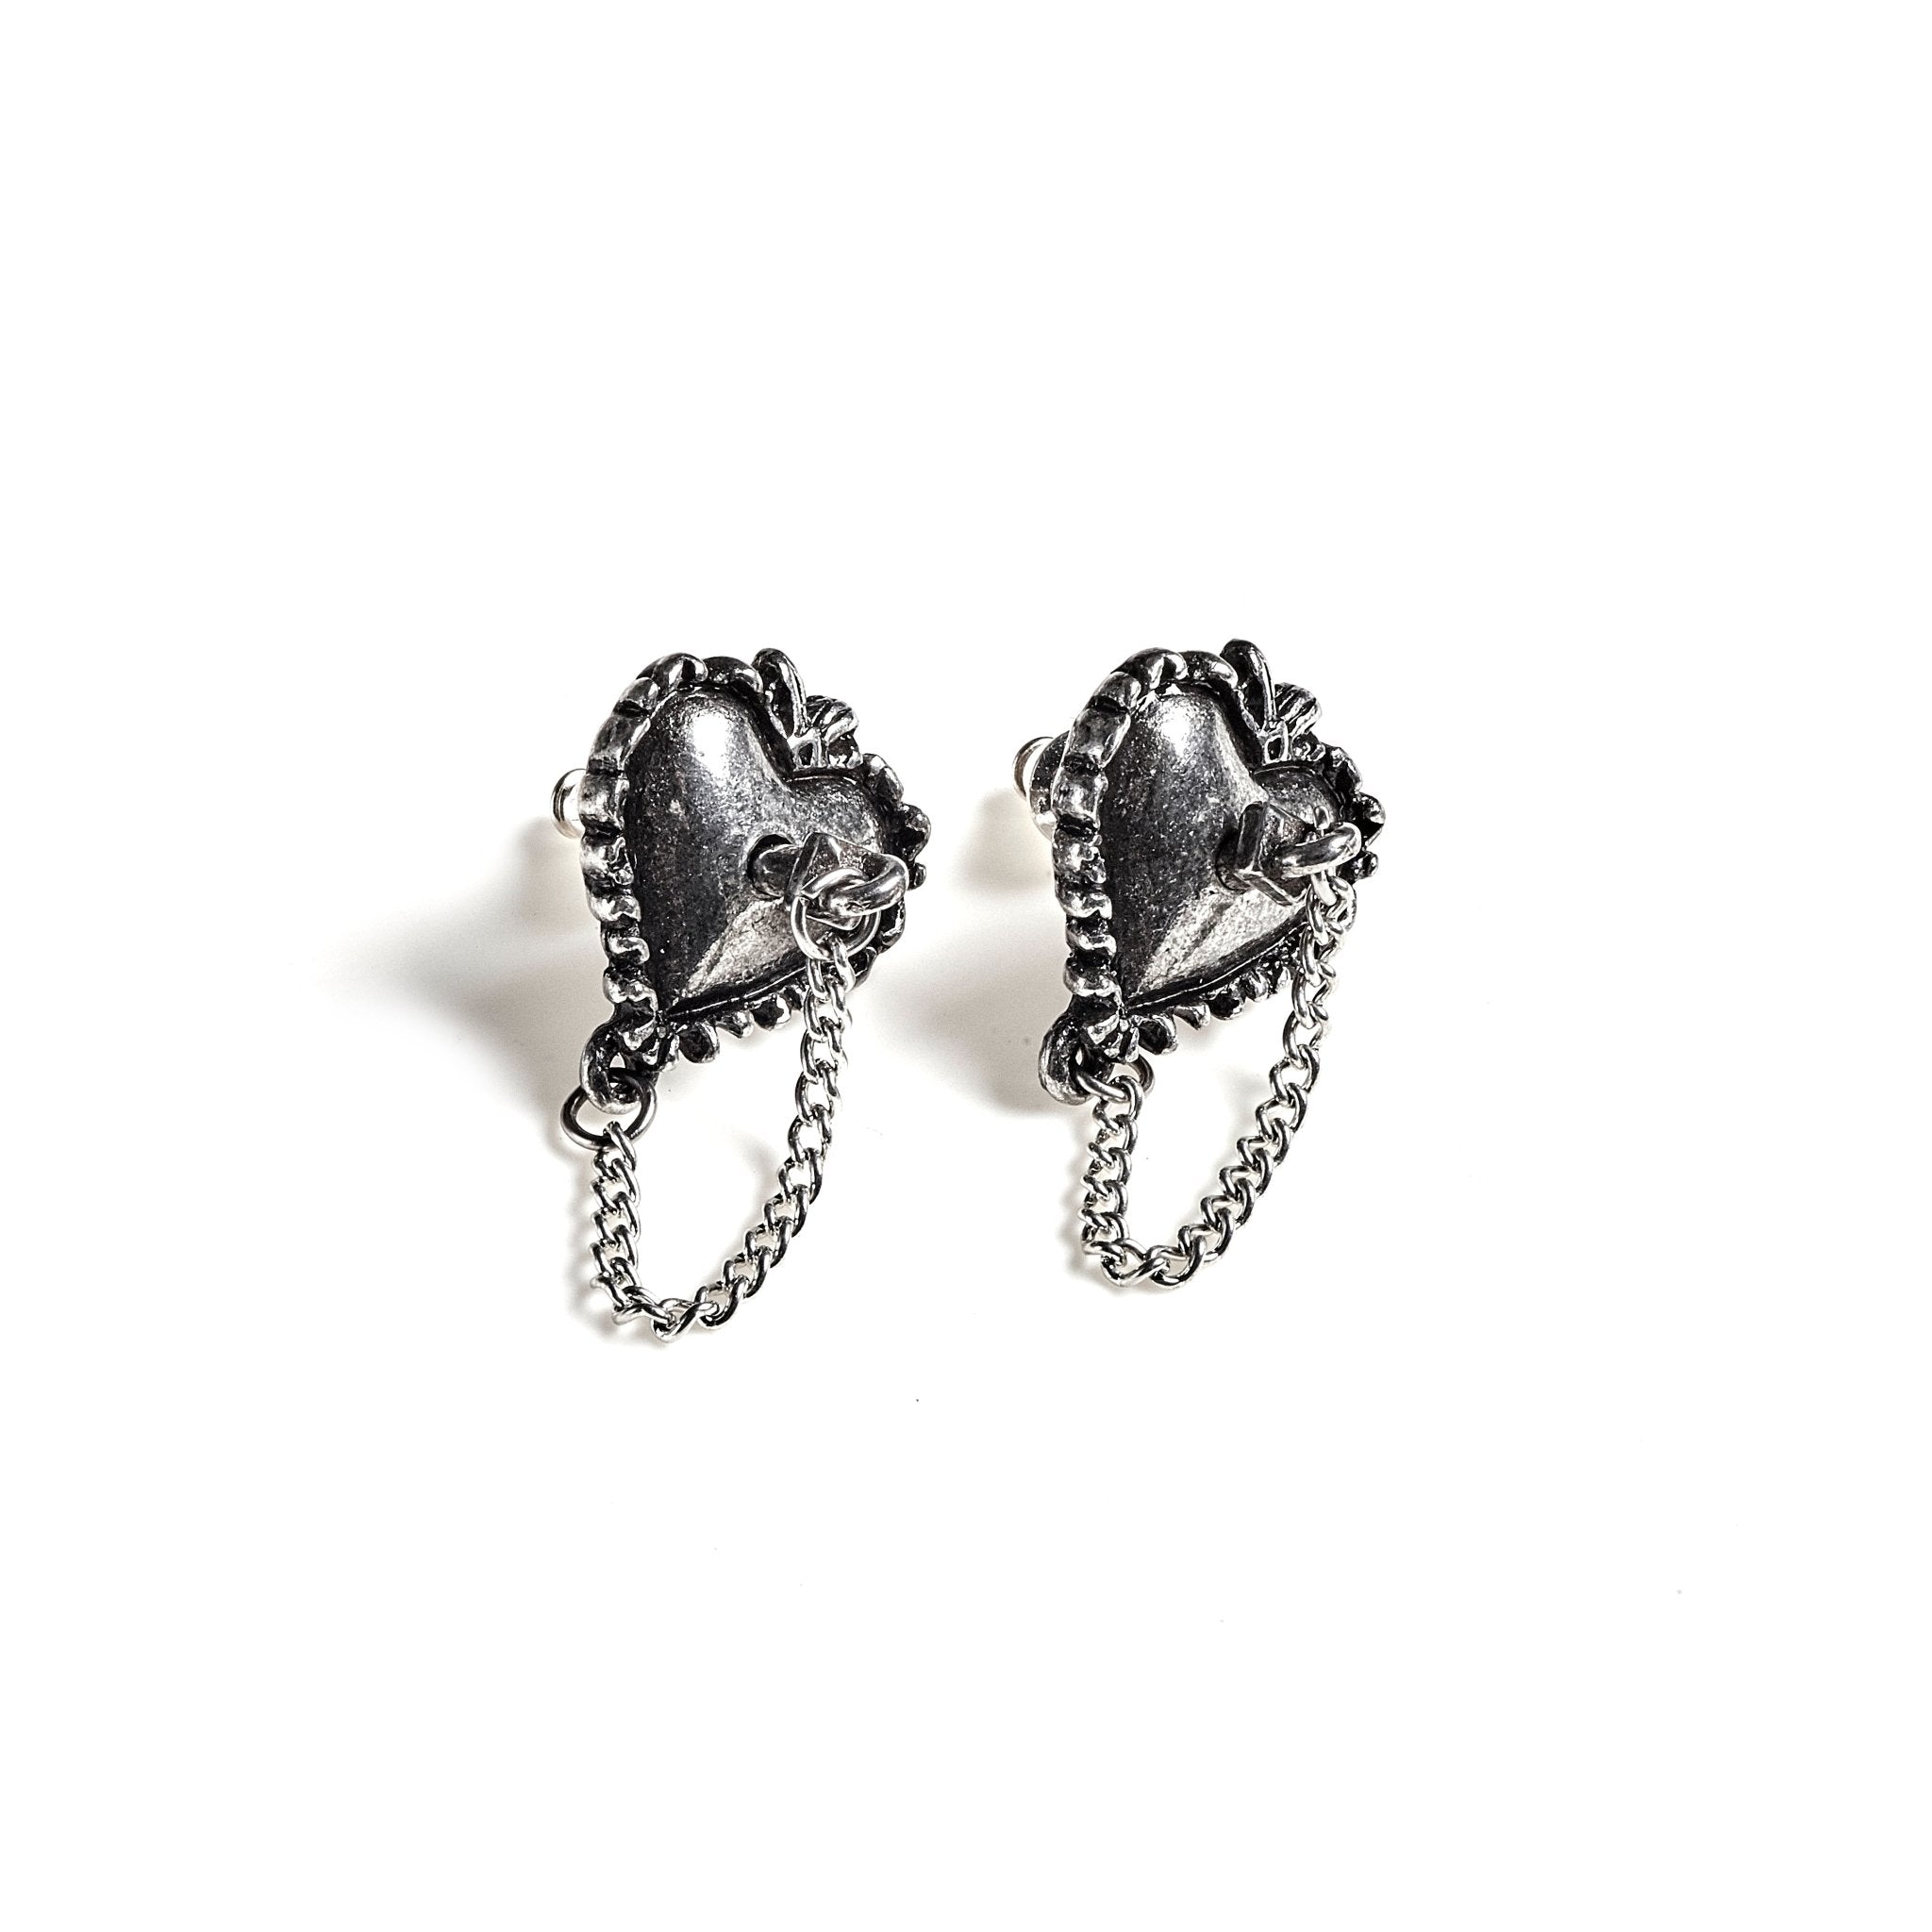 Witches Heart Earring Studs - Alchemy of England - 3